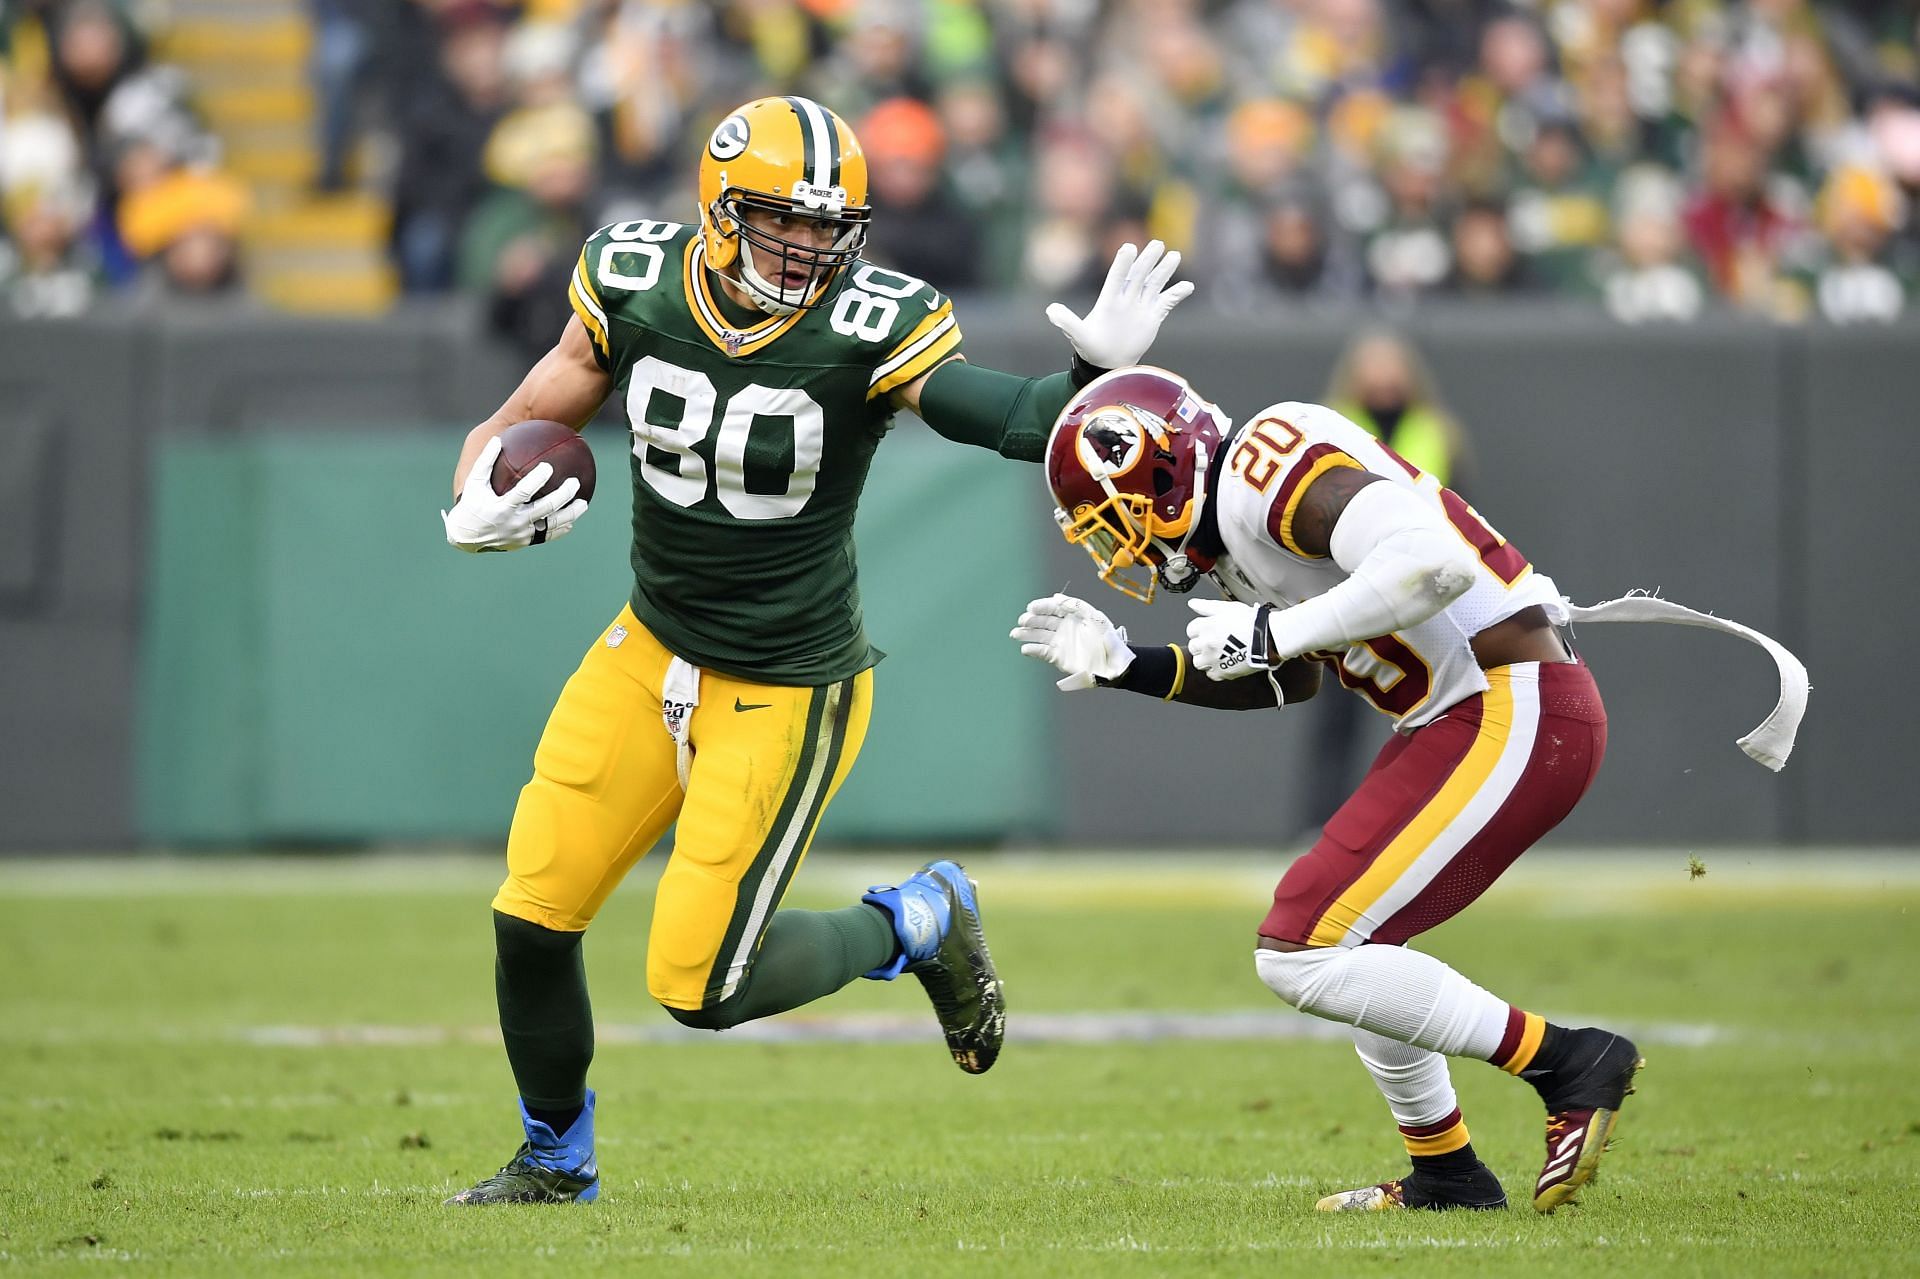 Packers Game Today: Packers vs. Washington injury report, spread